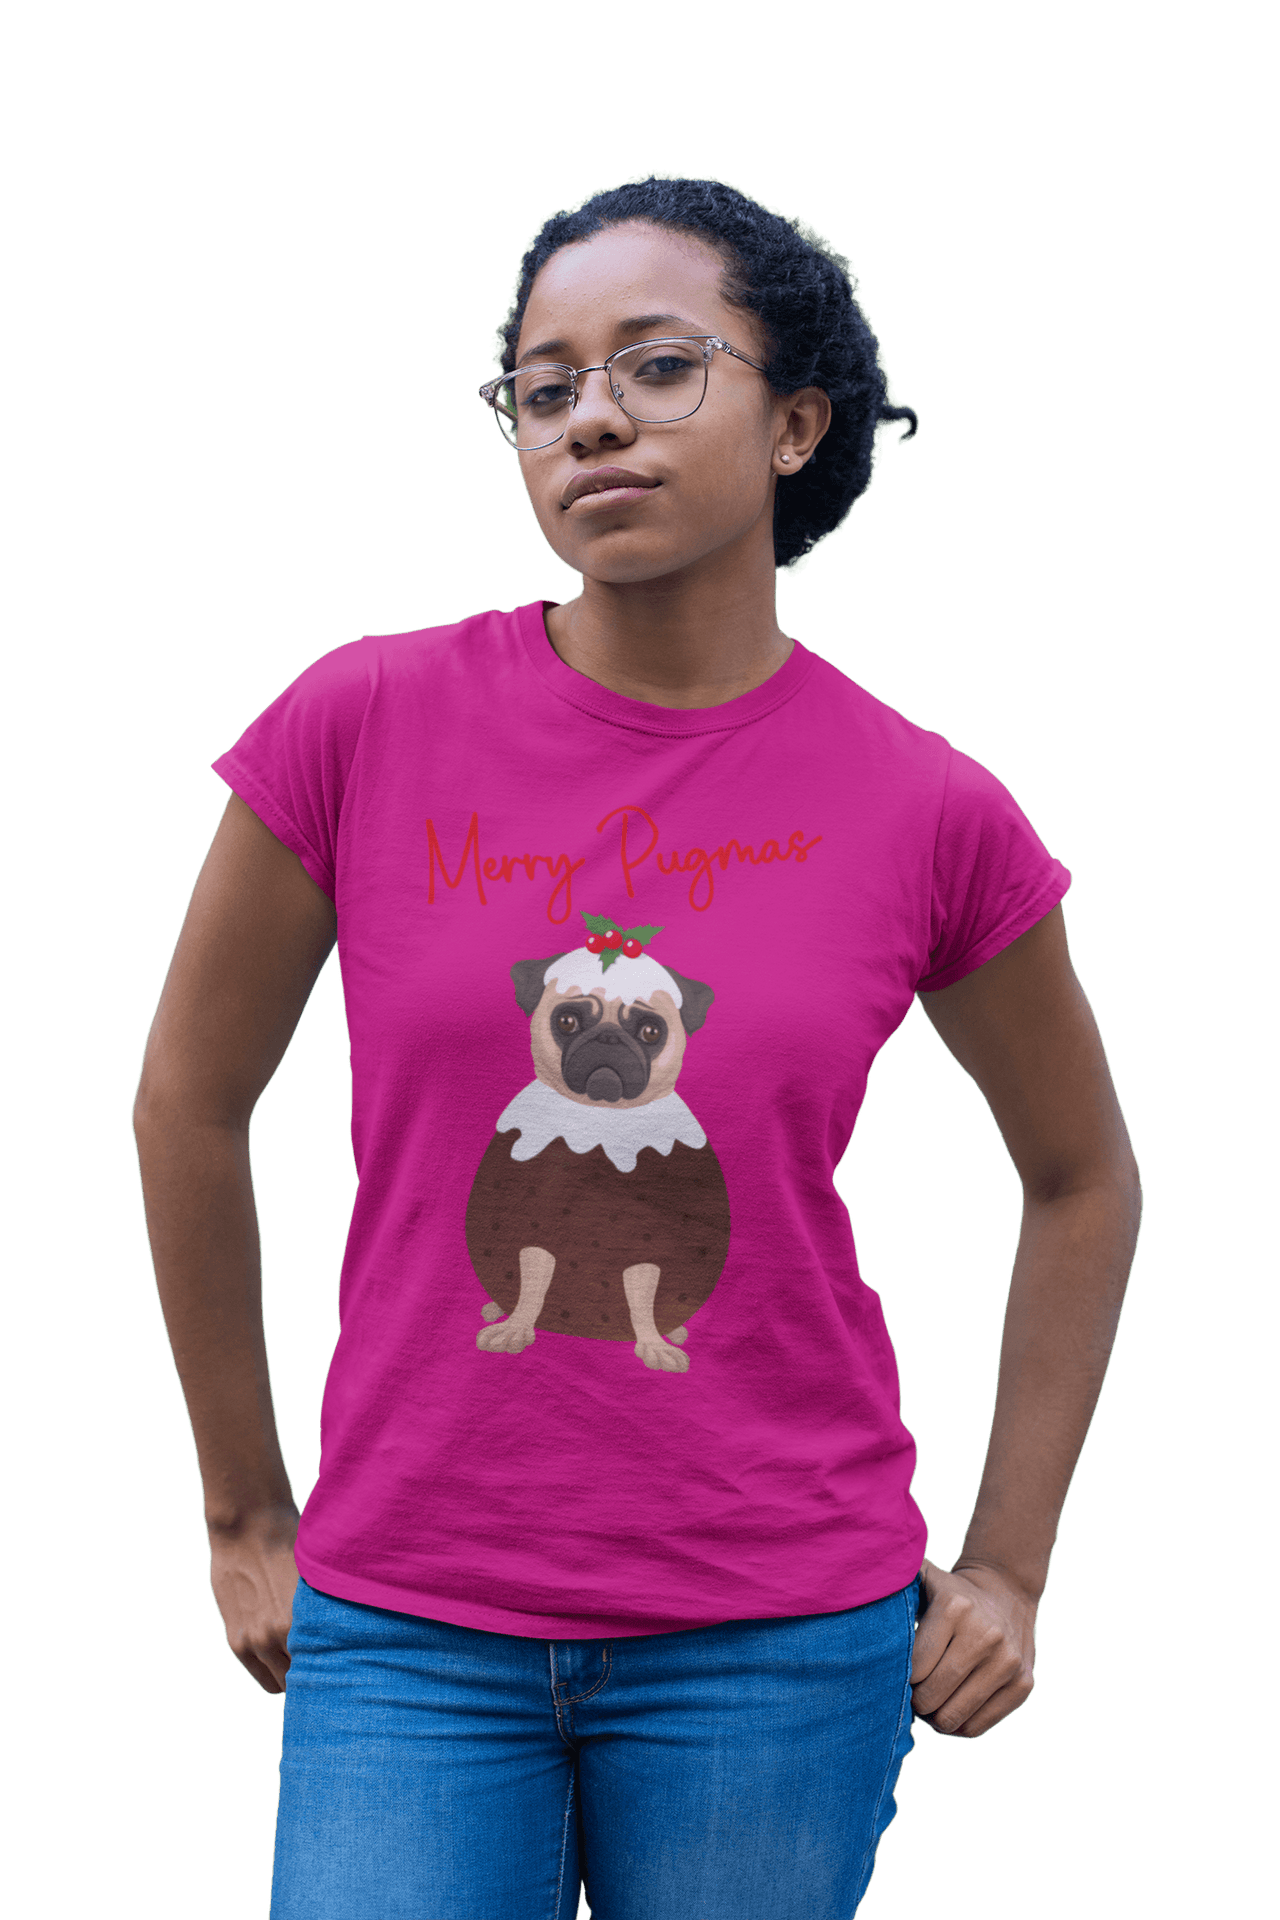 Merry Pugmas Christmas Fitted Womens T-Shirt 8Ball